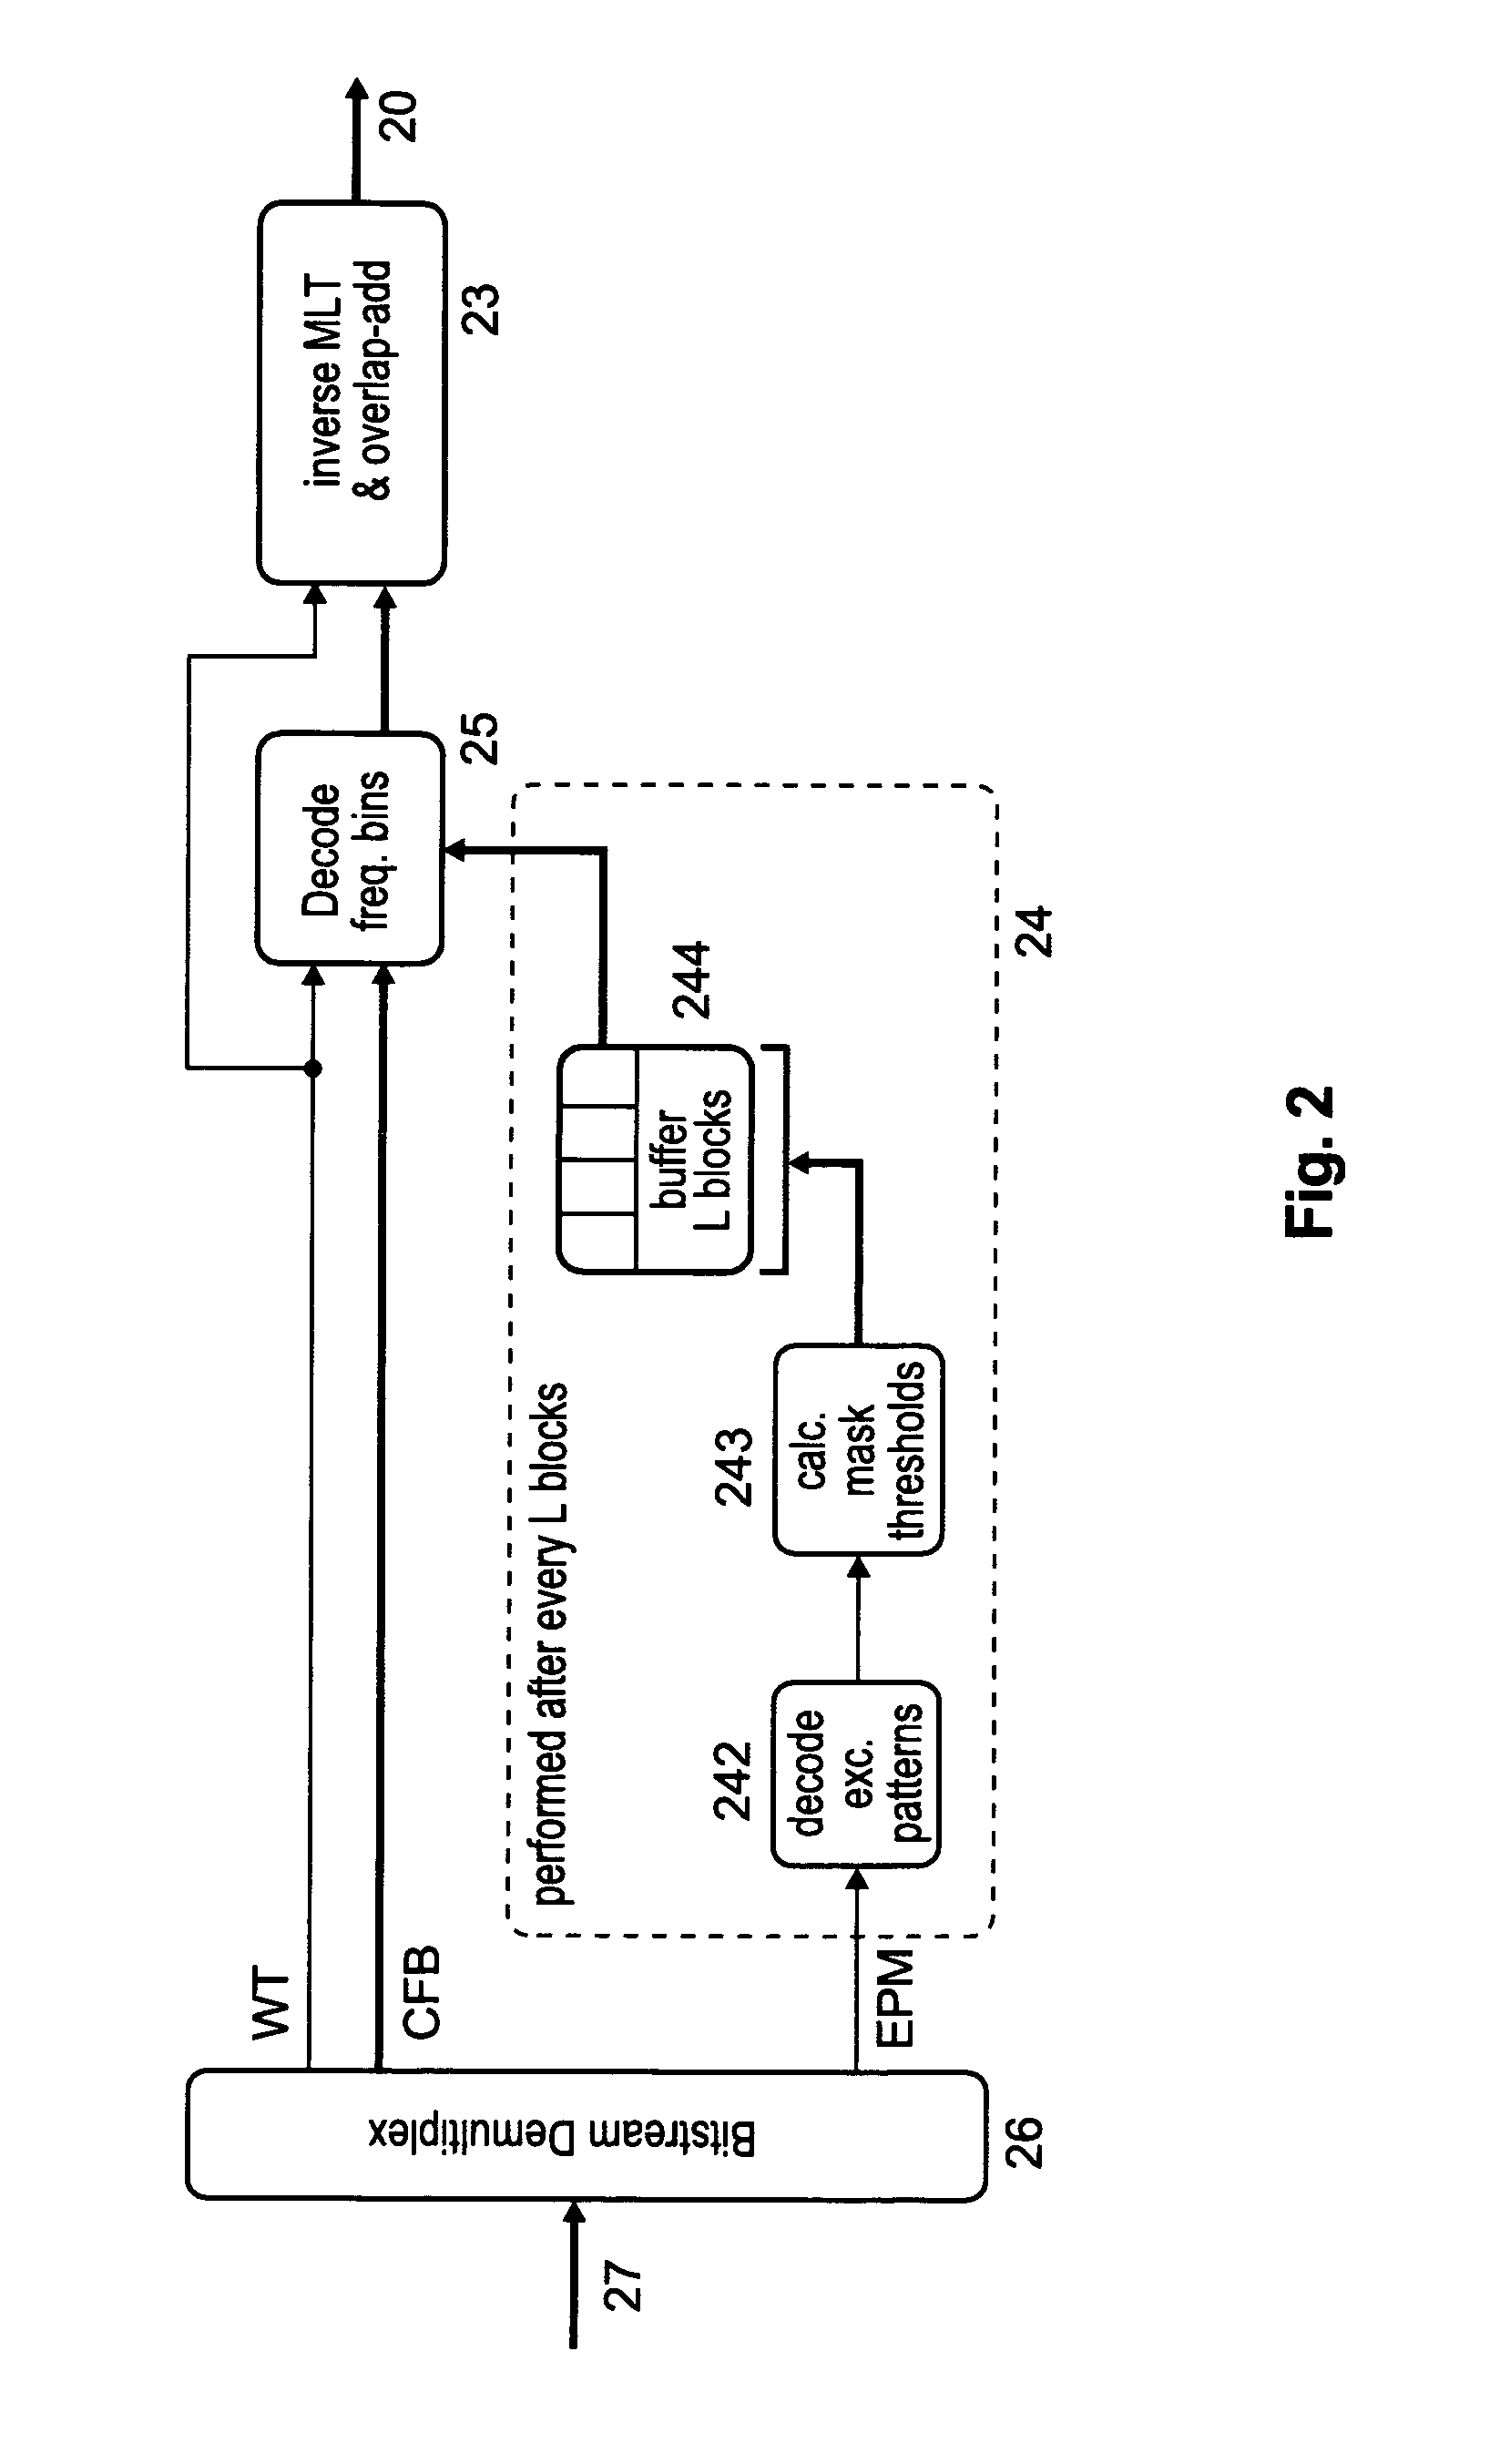 Method and apparatus for encoding and decoding excitation patterns from which the masking levels for an audio signal encoding and decoding are determined